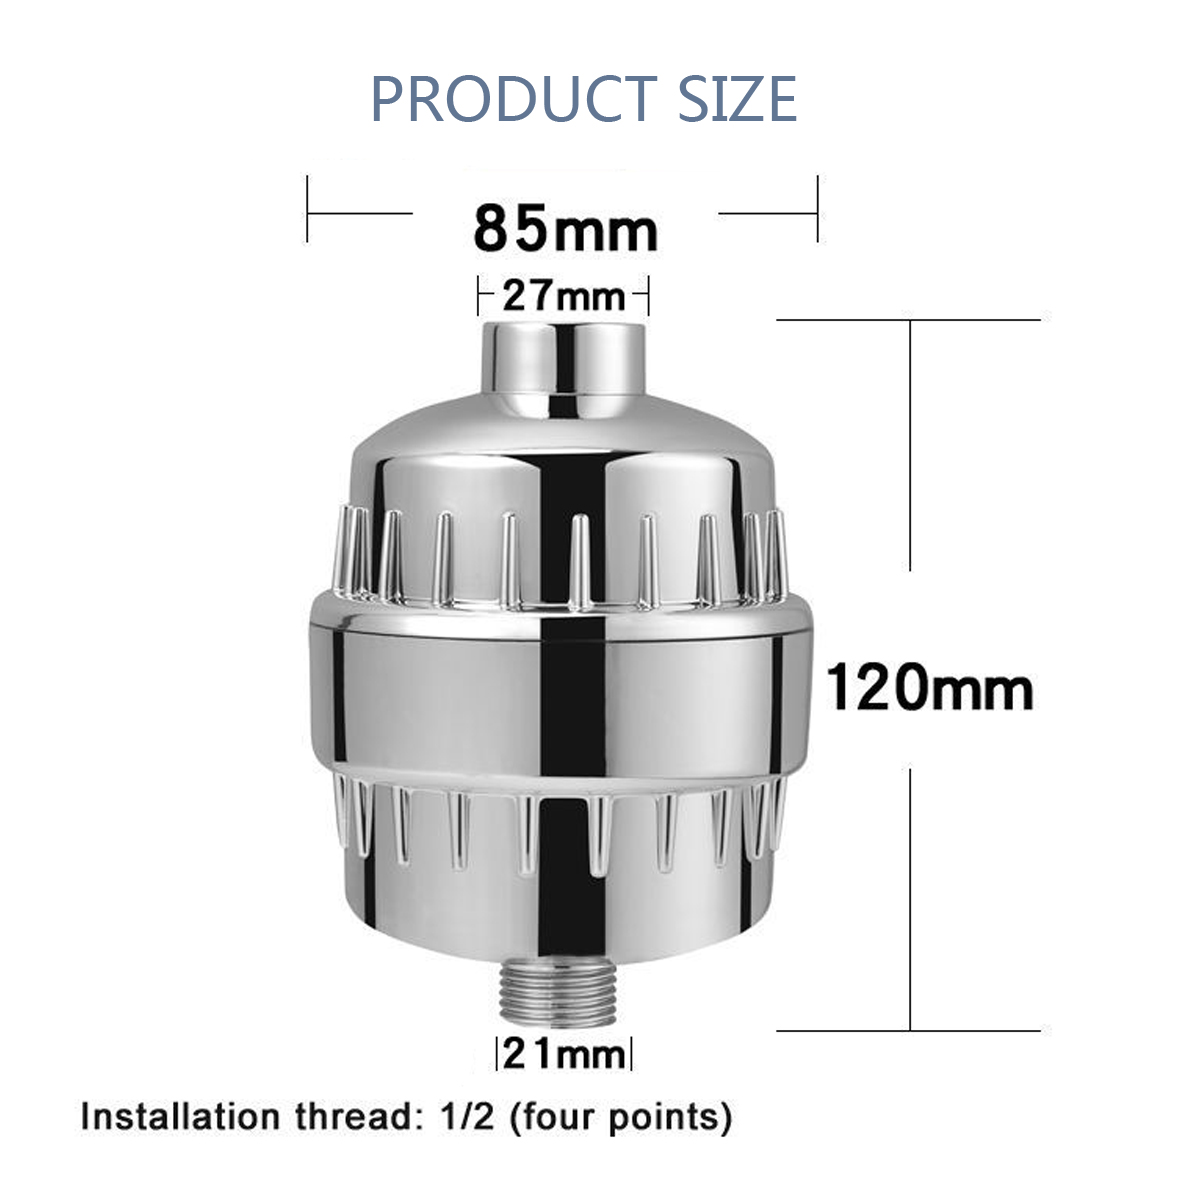 15 Bath Water Purifier Bathroom Shower Filter 1/2'' Health Softener Chlorine Removal High Output Universal Water Treatment